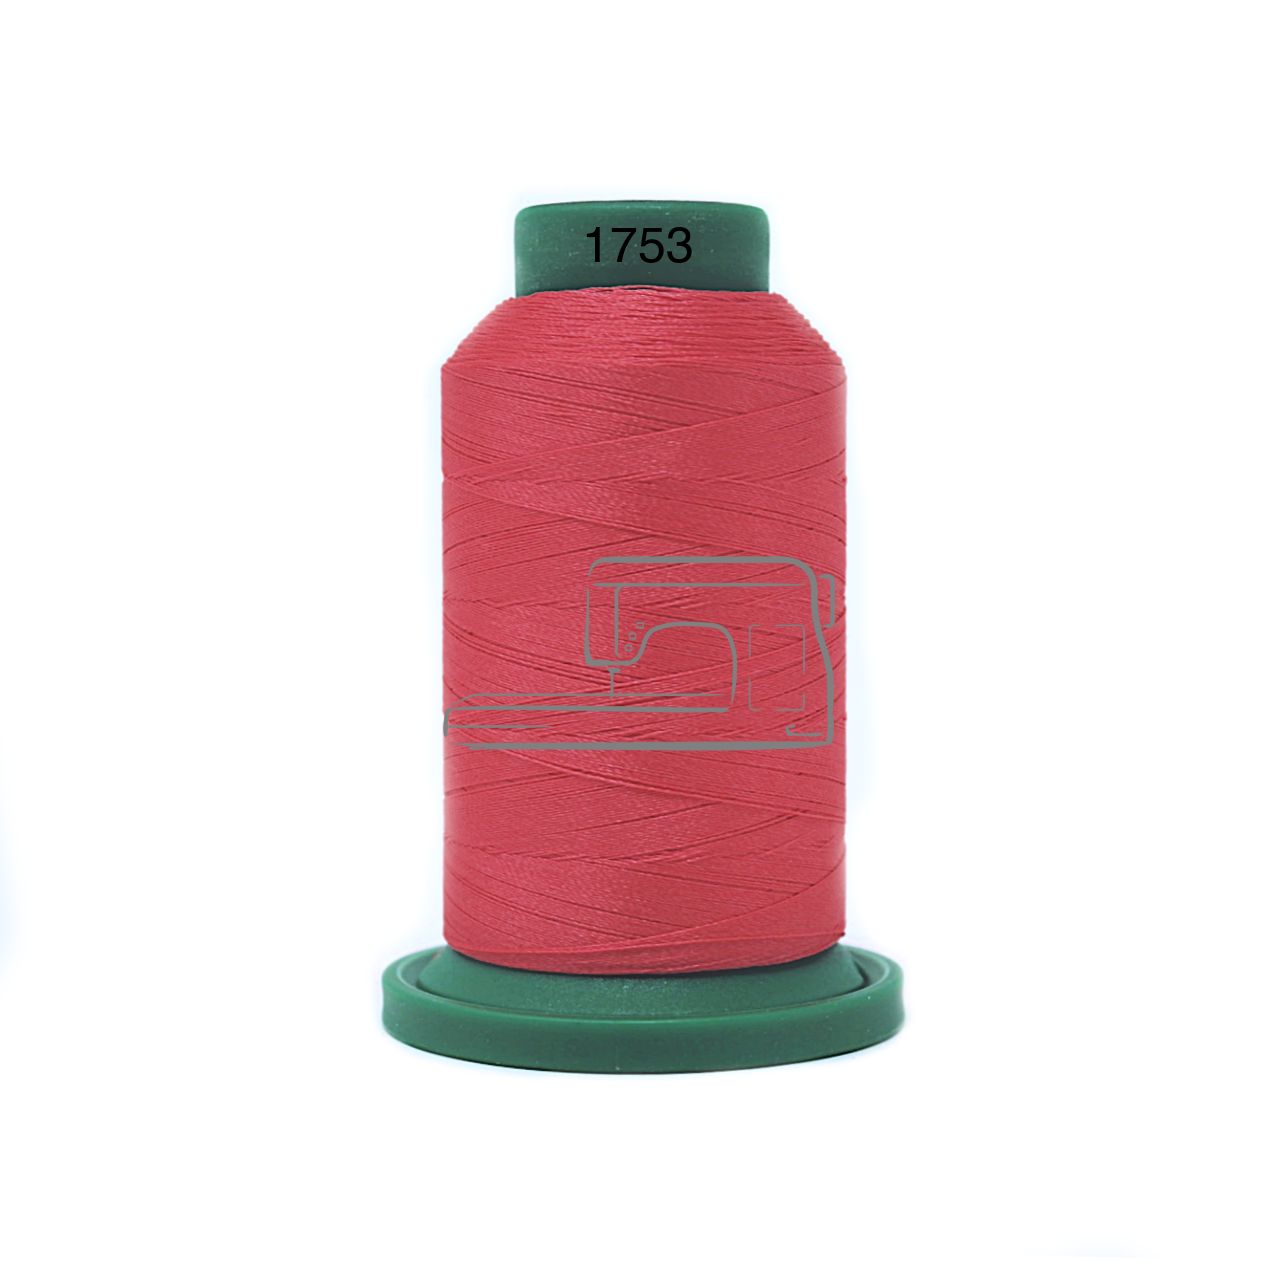 Isacord Isacord sewing and embroidery thread 1753